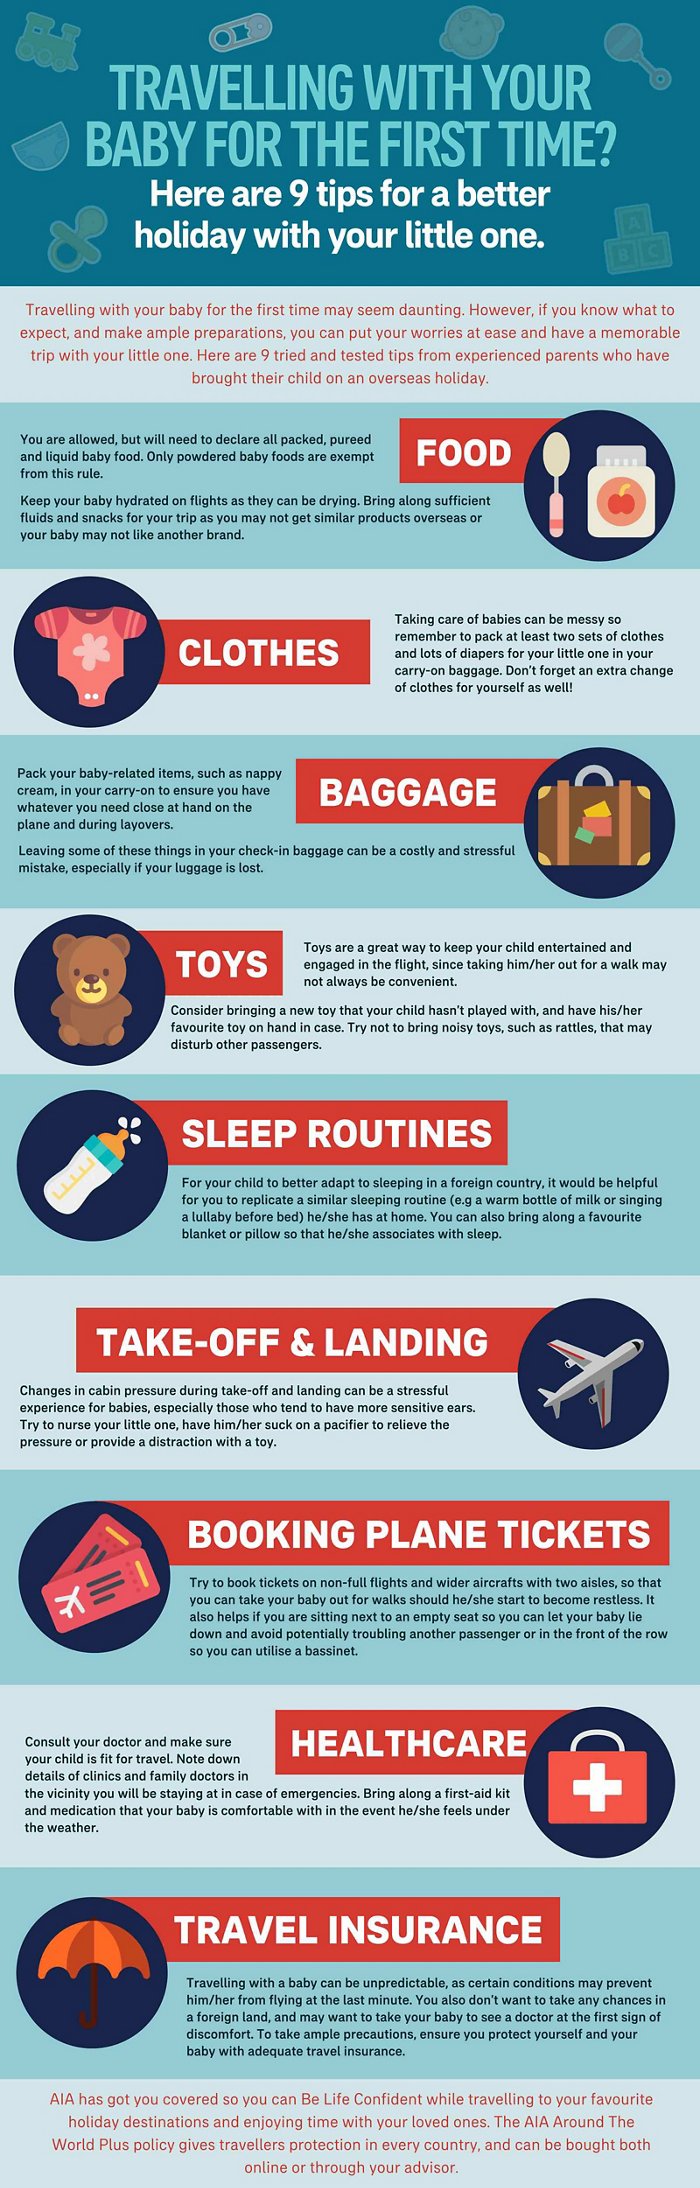 tips-travelling-with-baby